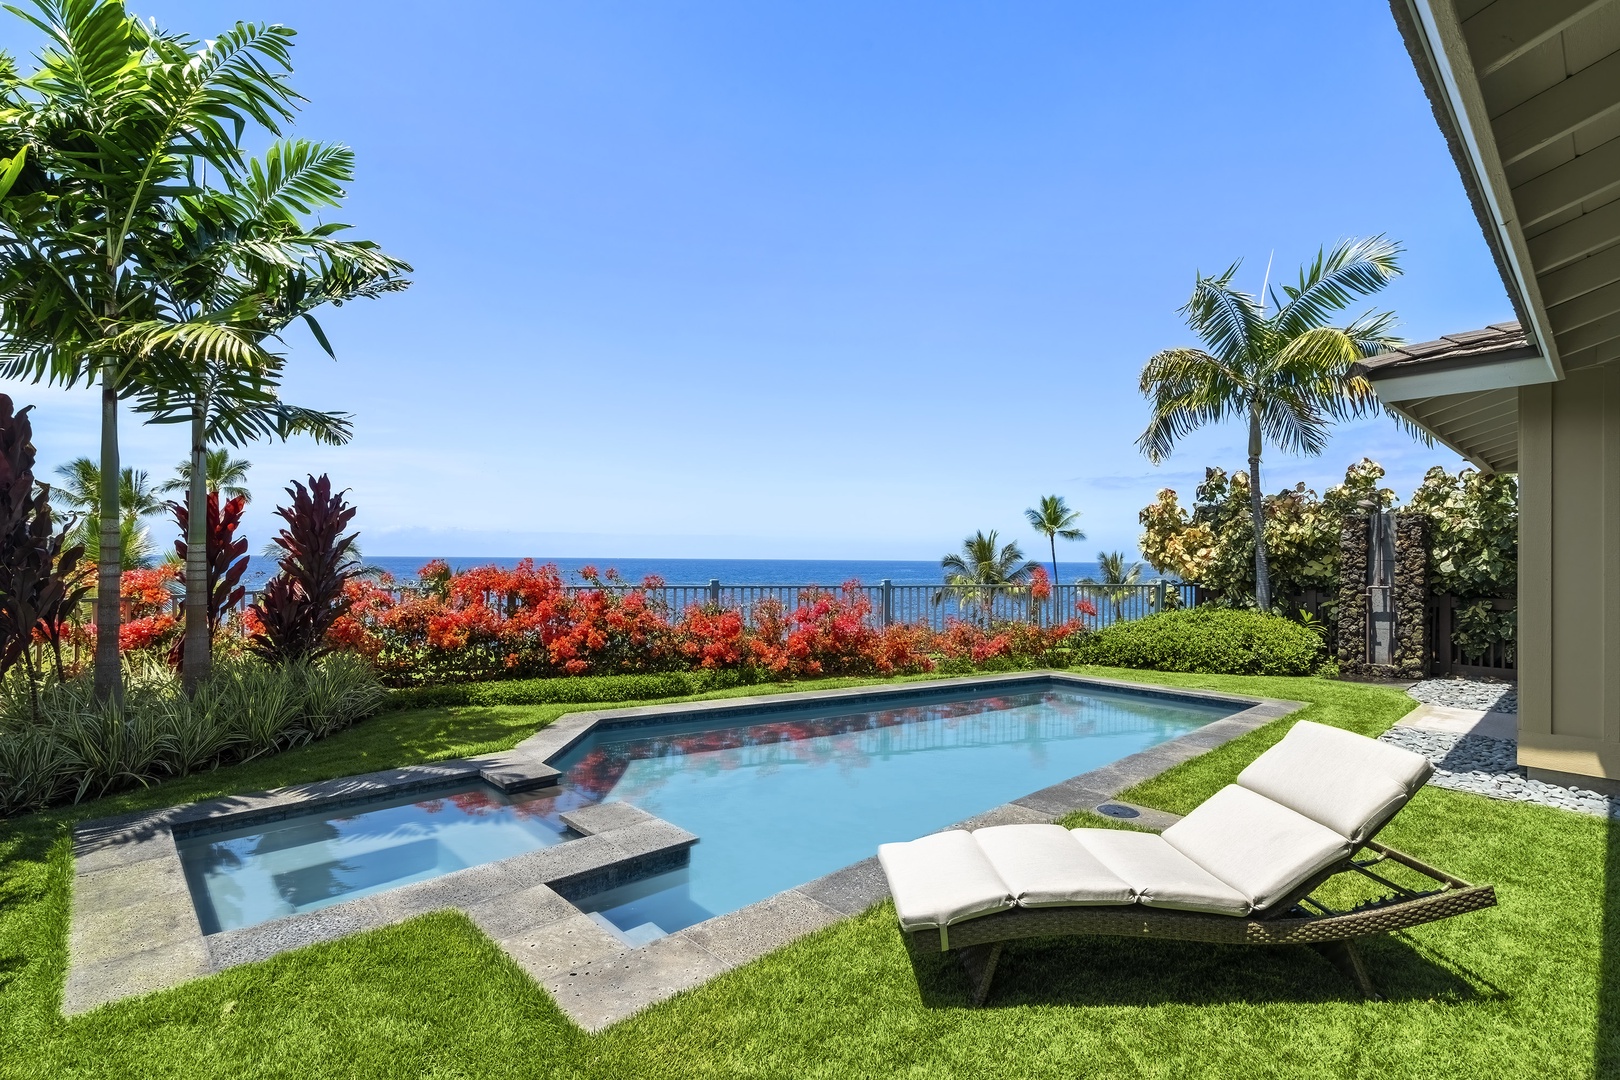 Kailua Kona Vacation Rentals, Green/Blue Combo - Private saltwater pool & spa!